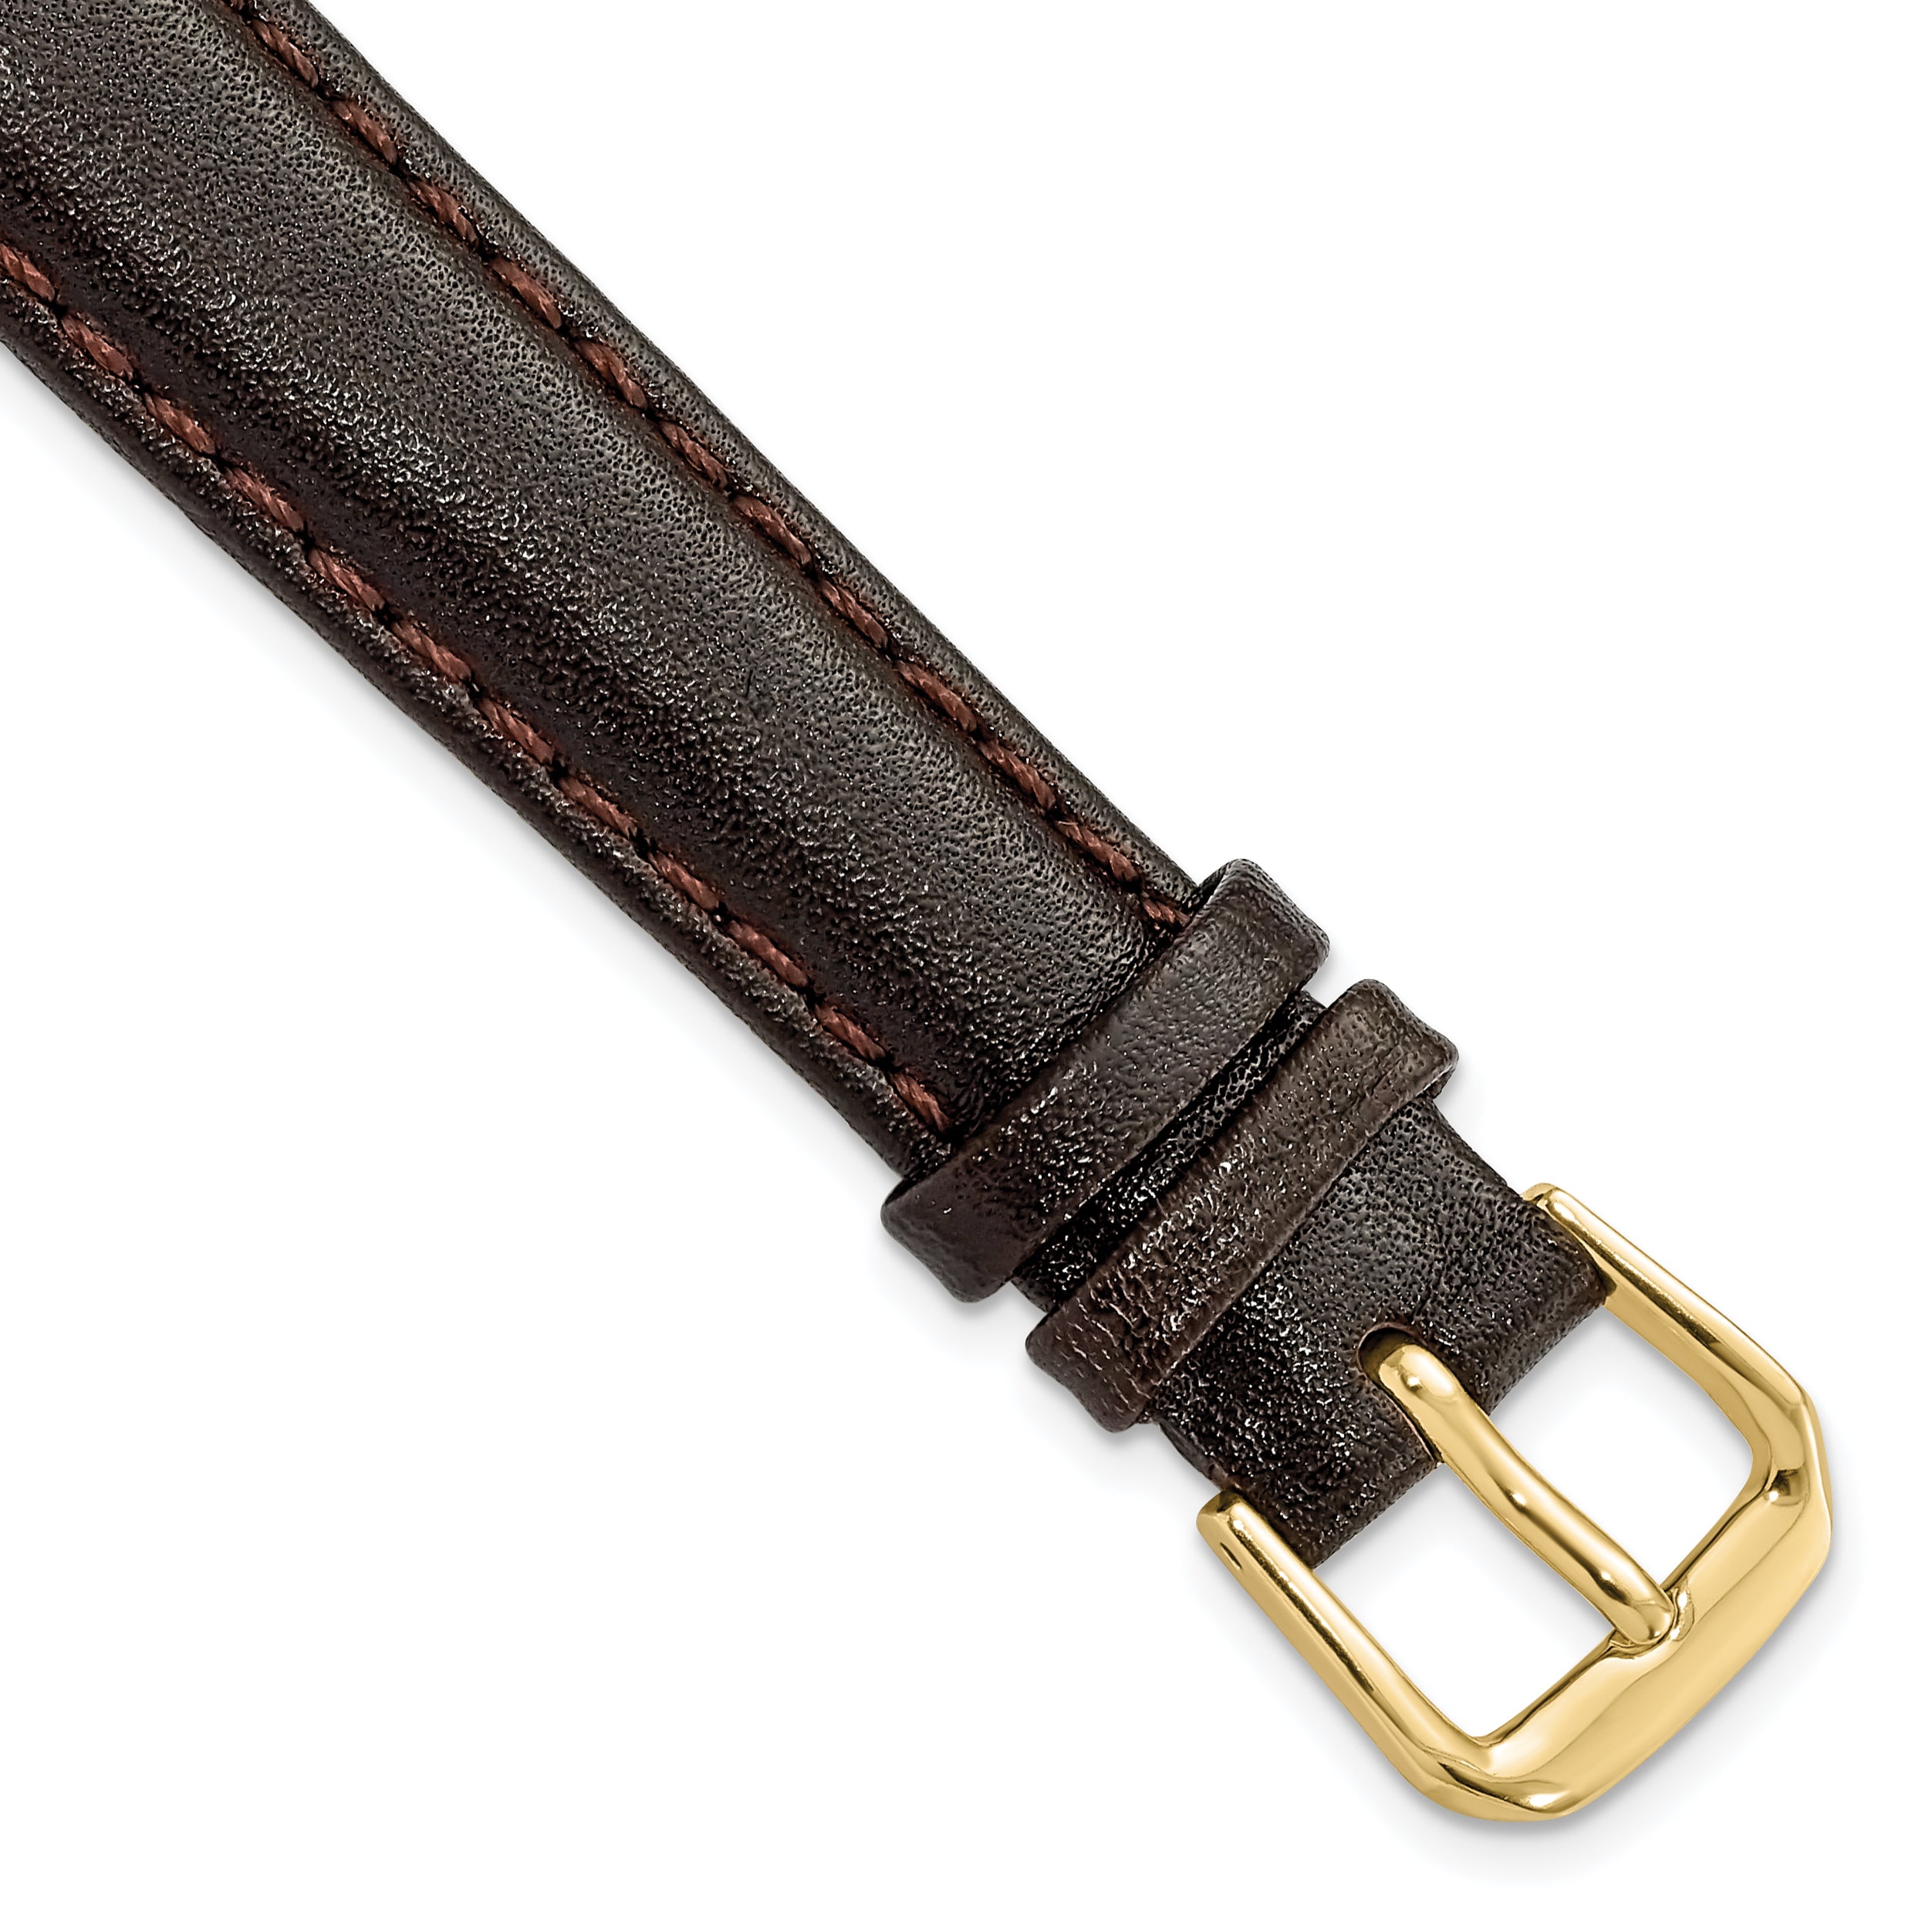 DeBeer 14mm Short Dark Brown Smooth Leather with Gold-tone Buckle 6.25 inch Watch Band